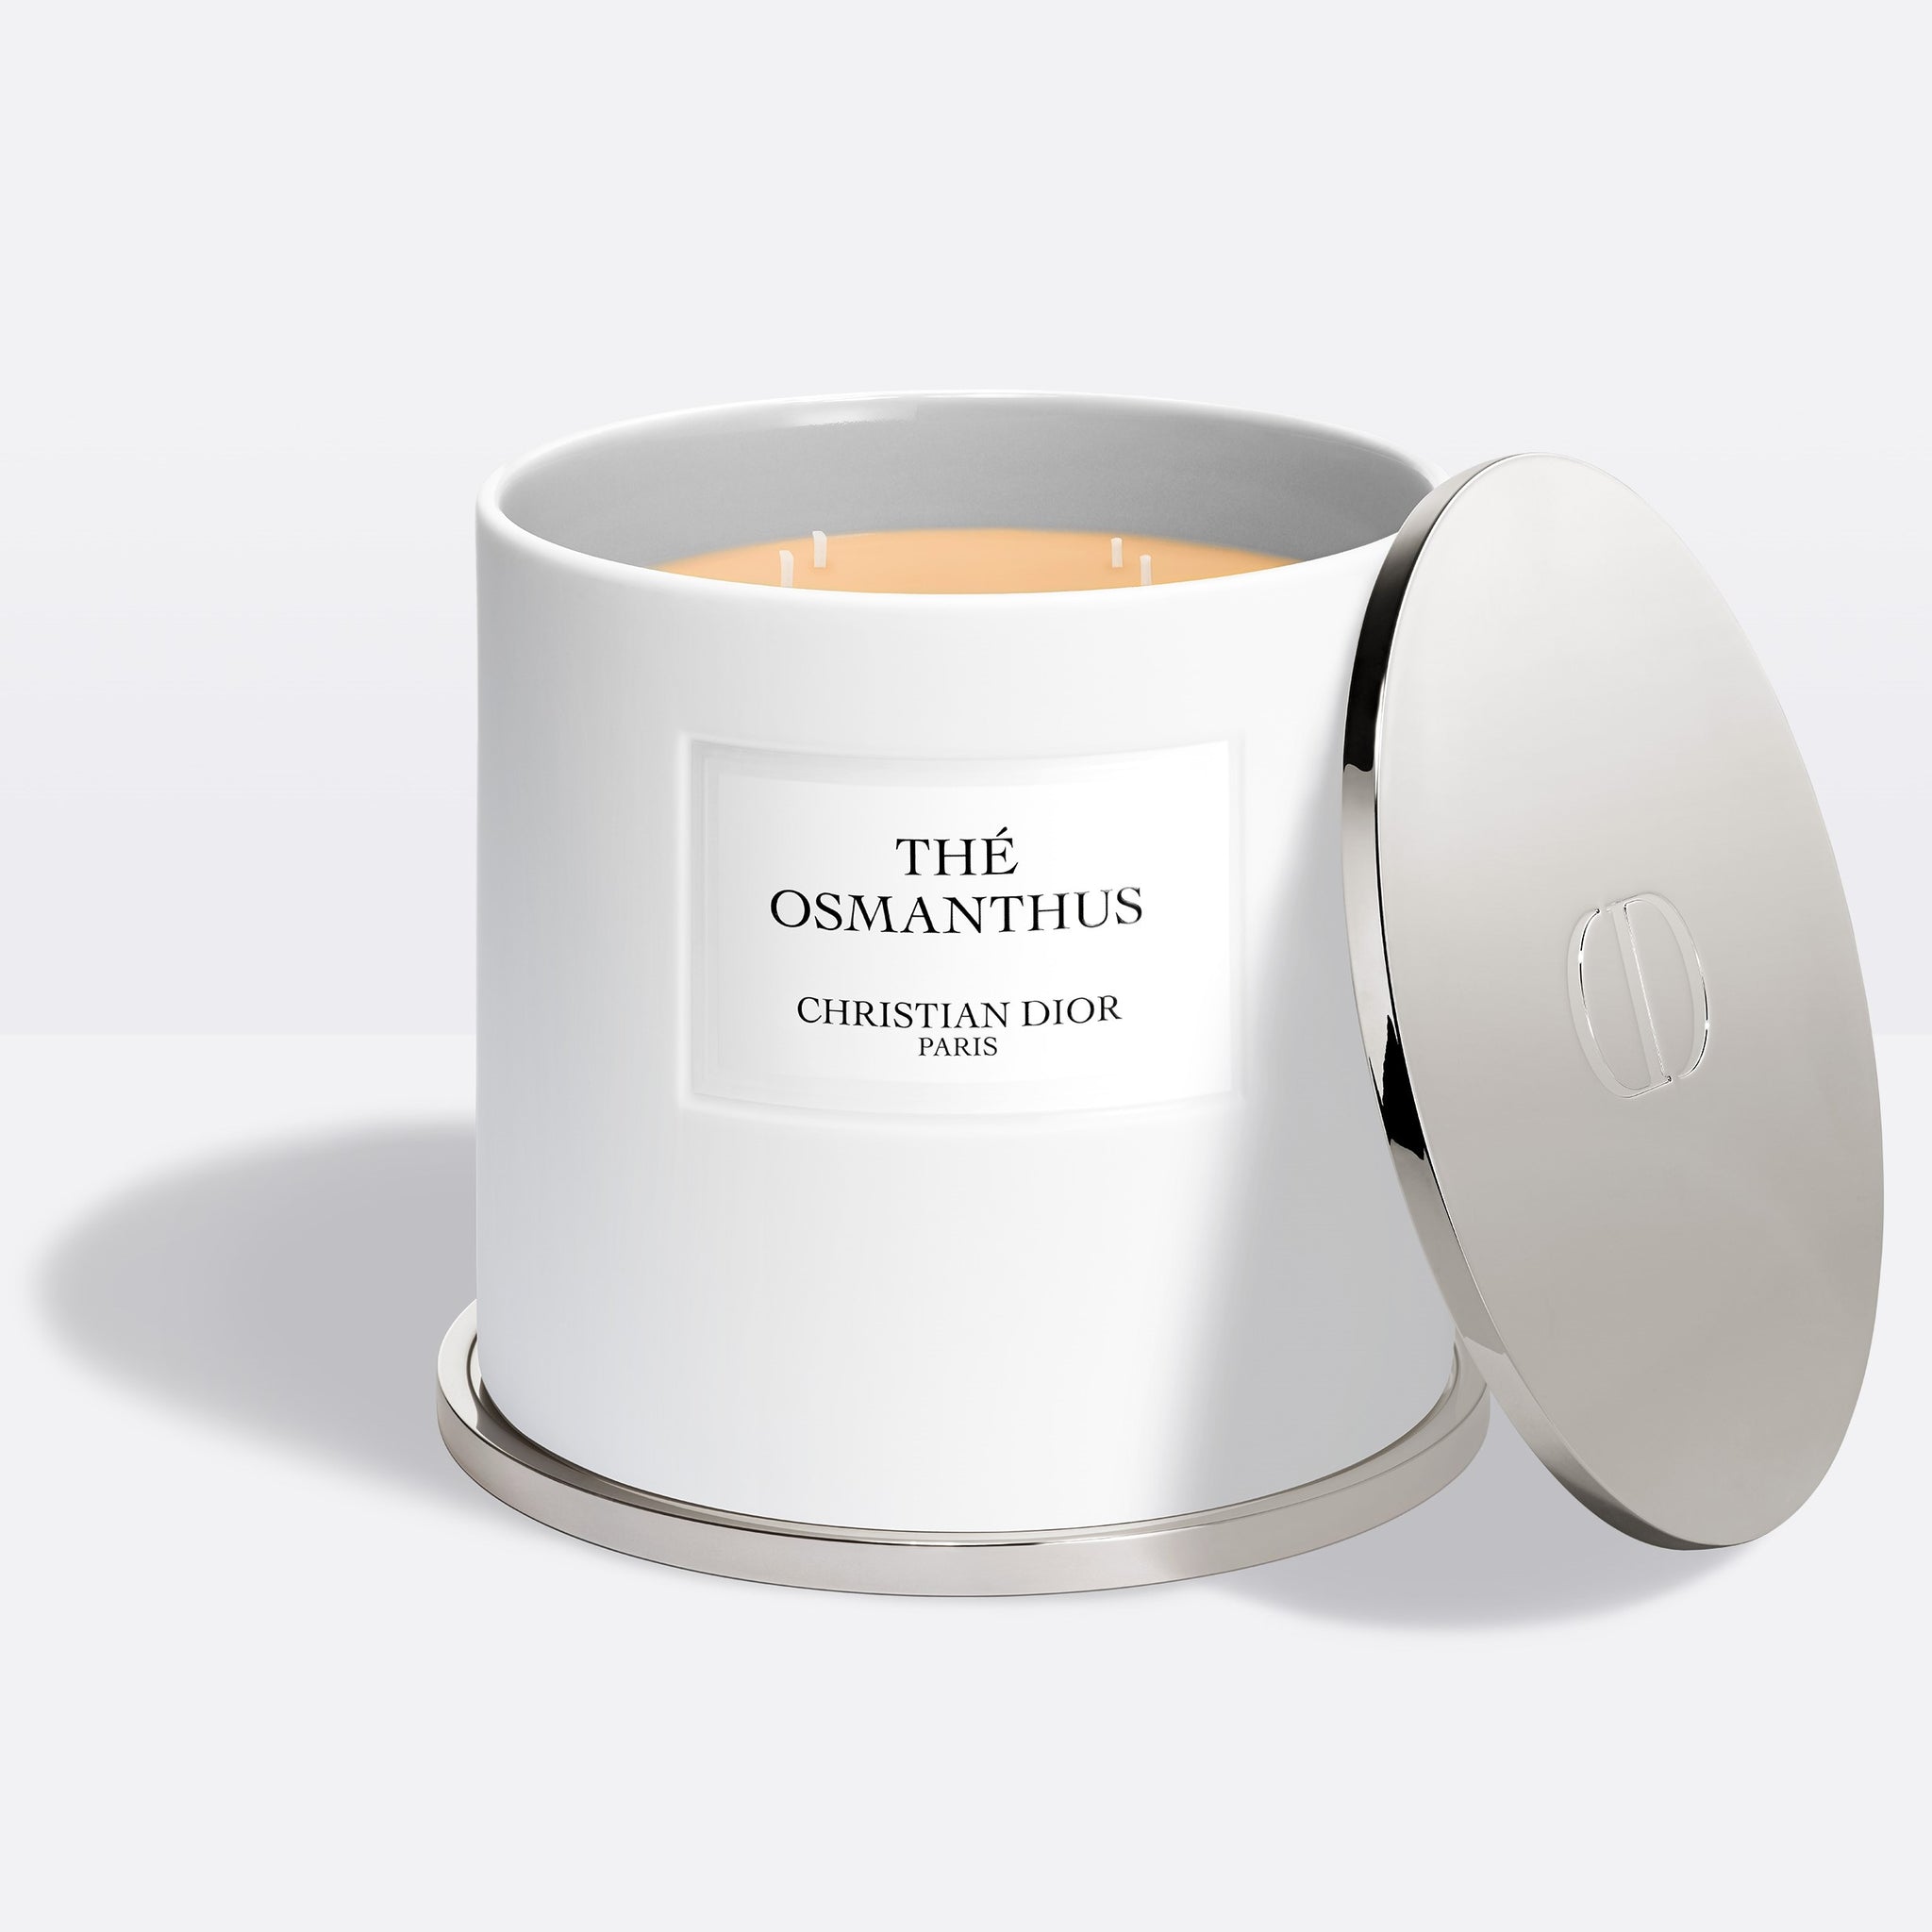 THÉ OSMANTHUS GIANT CANDLE ~ Scented Candle - Apricot and Floral Notes - 1.5 kg